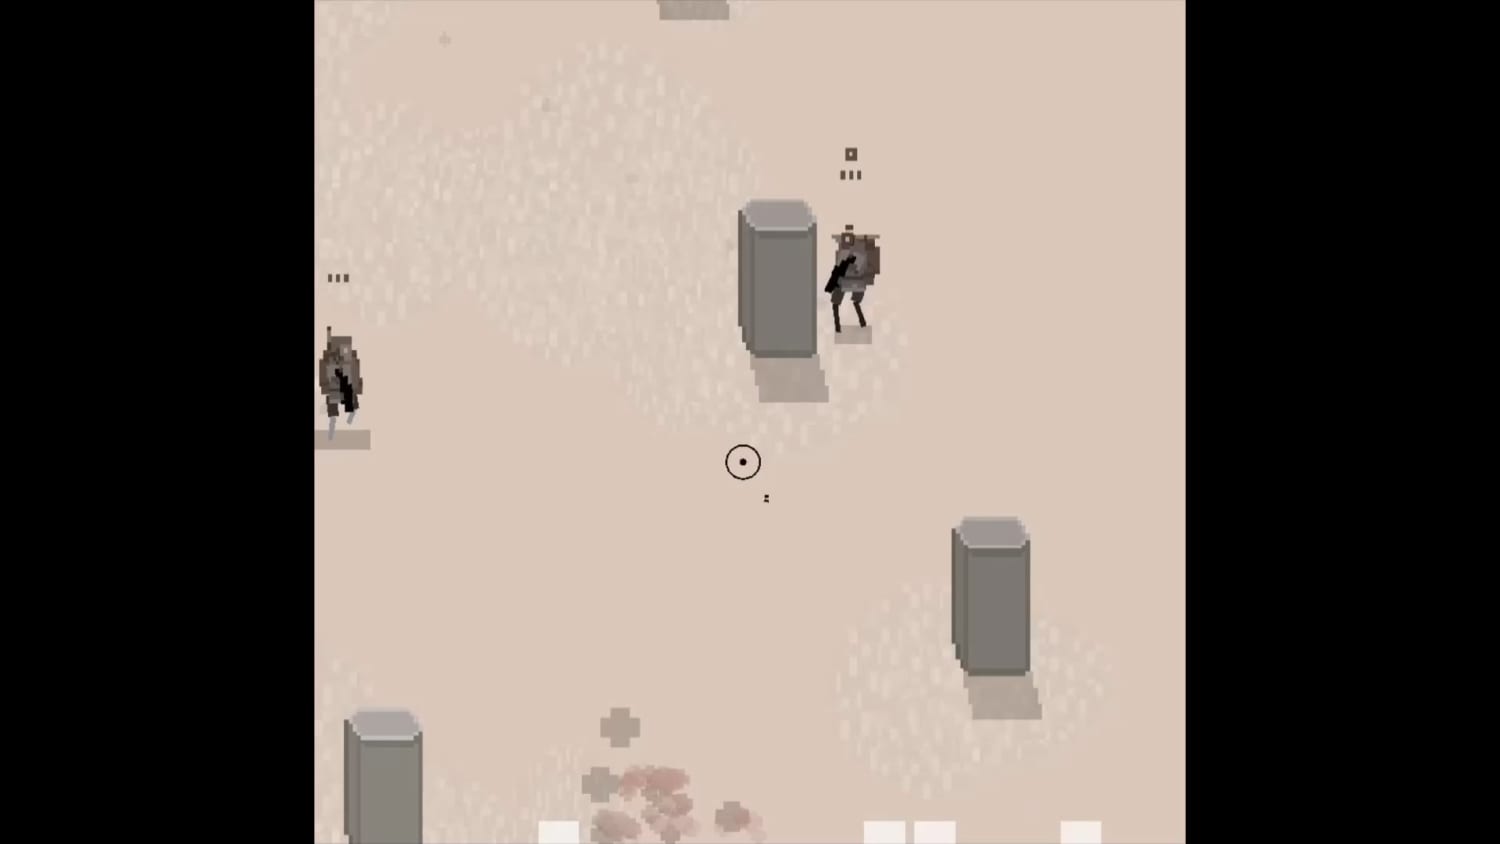 NOMAD has had some updates! New game types, enemies and weapons. Video related...